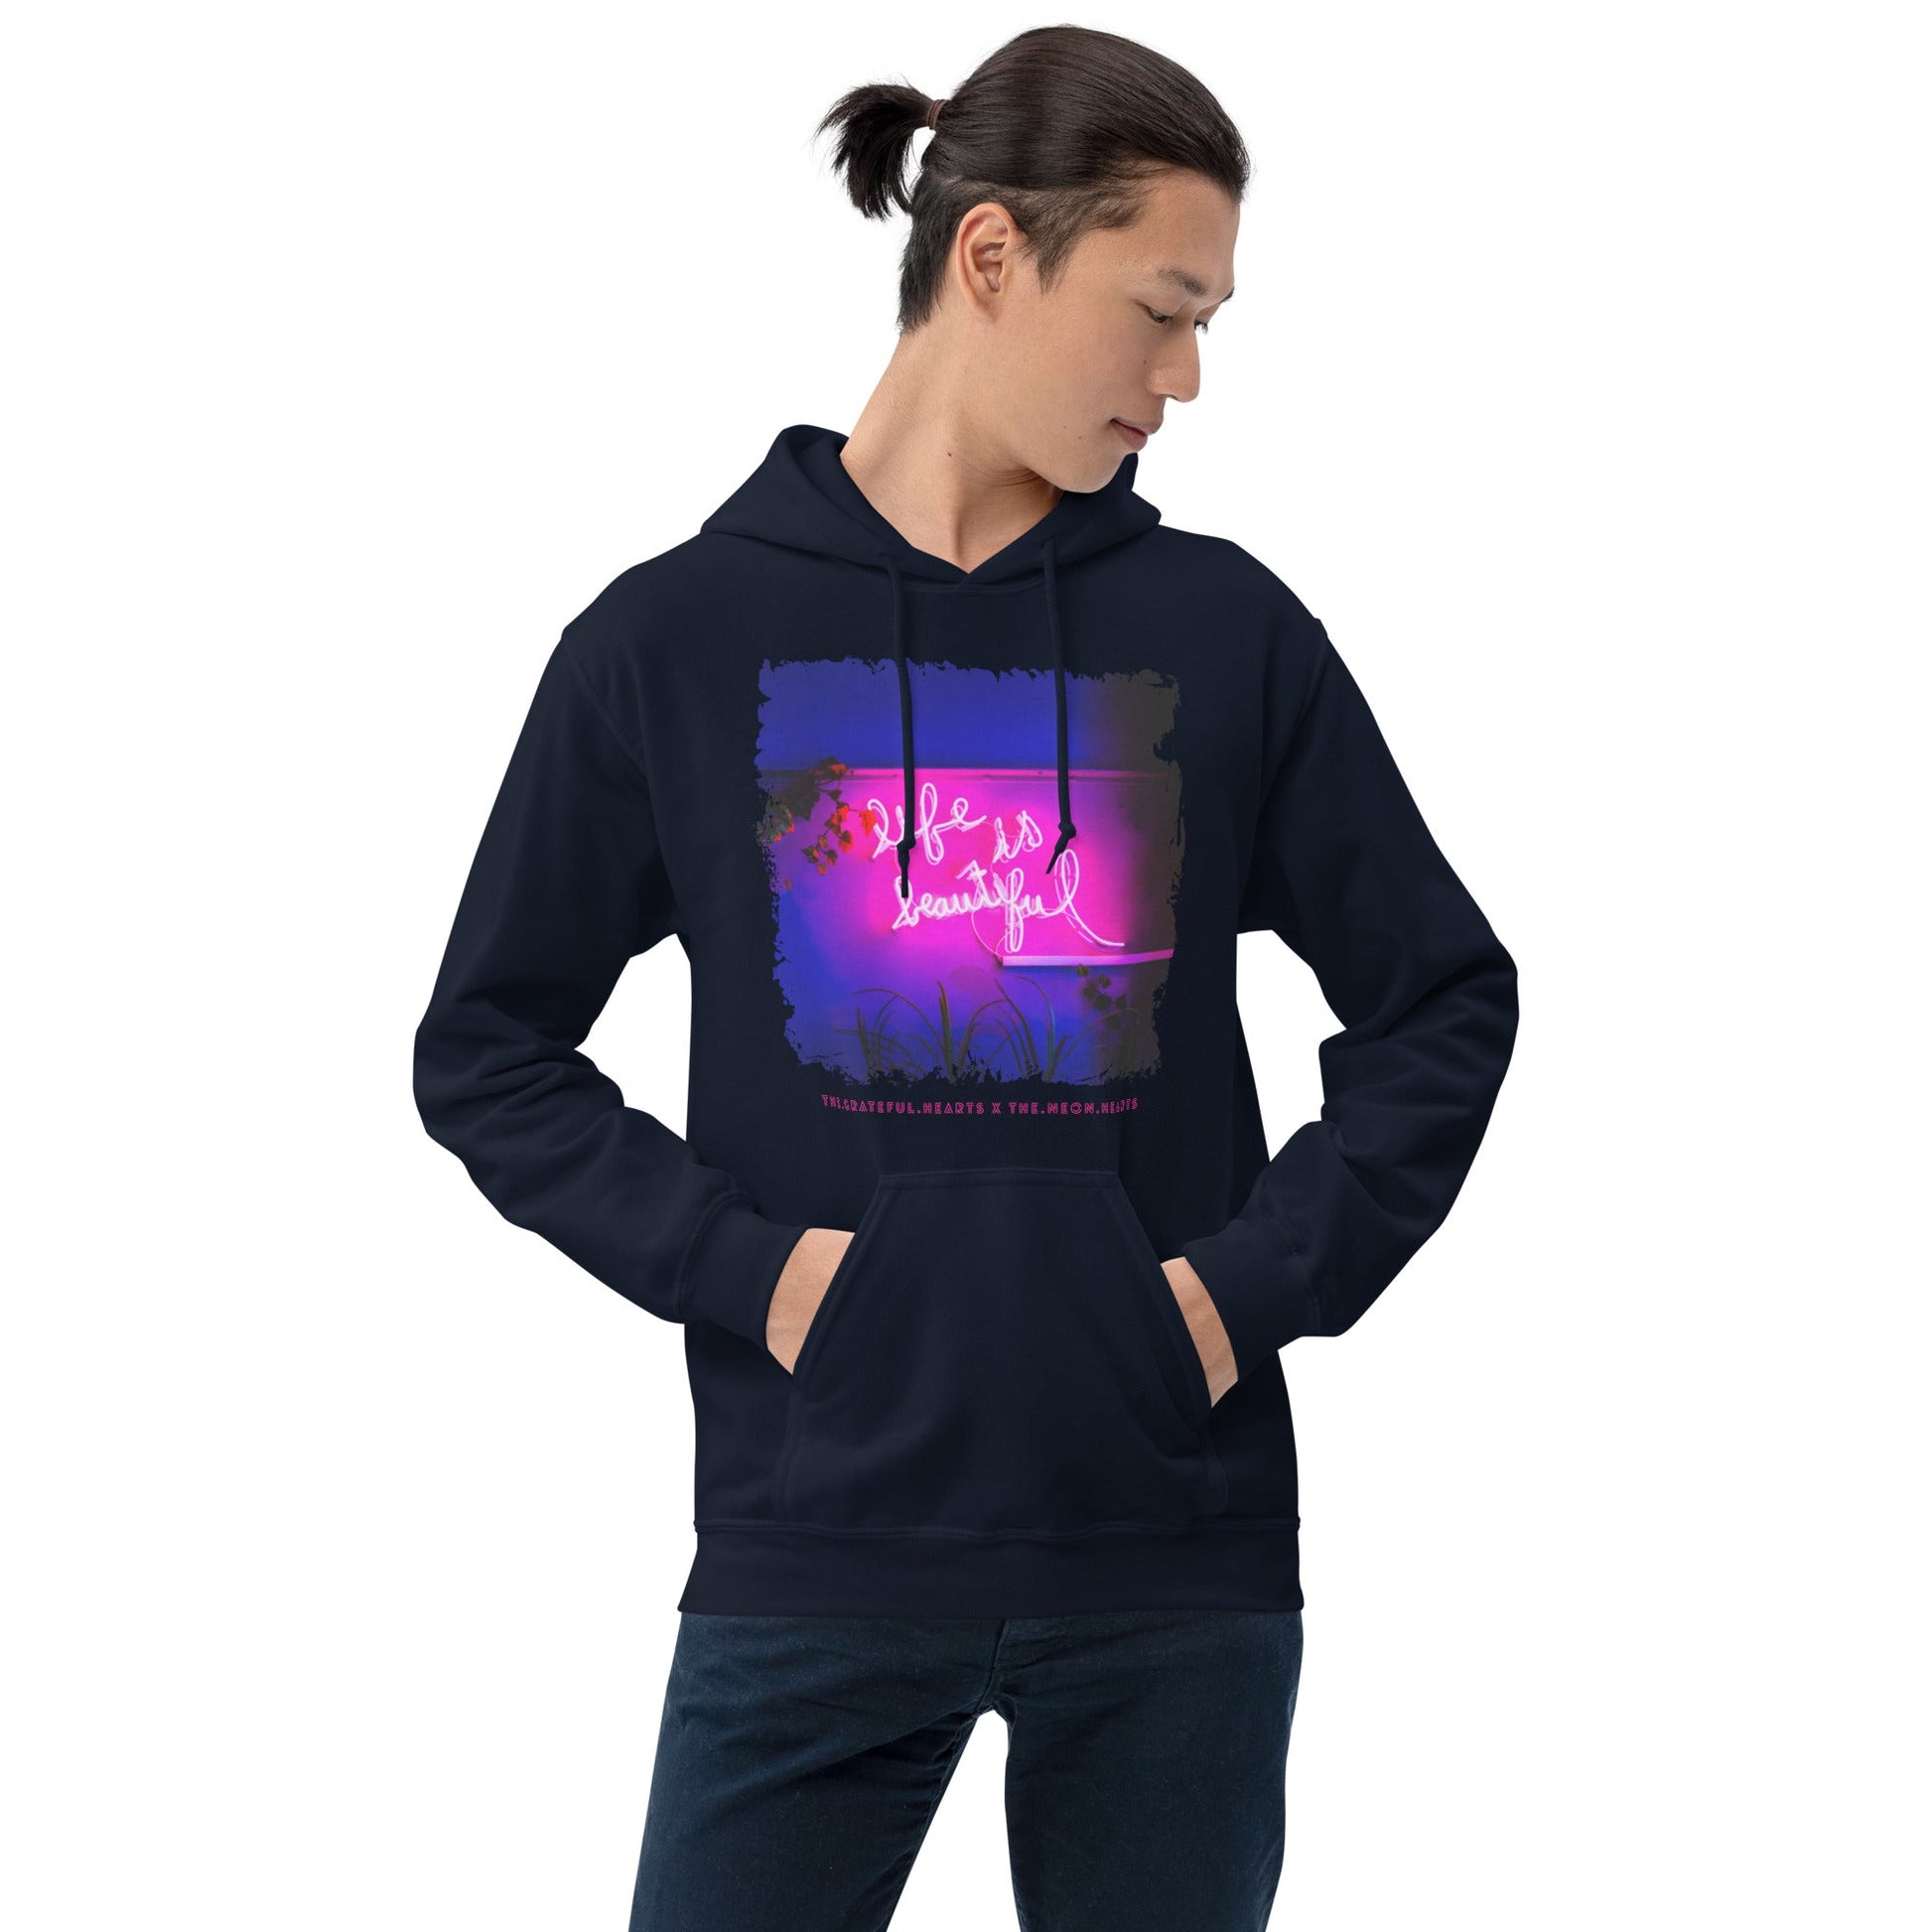 Life is Beautiful 💖 - Unisex Heavy Blend Hoodie (Available in Various Colors ❤️💙💜) - The Grateful Hearts